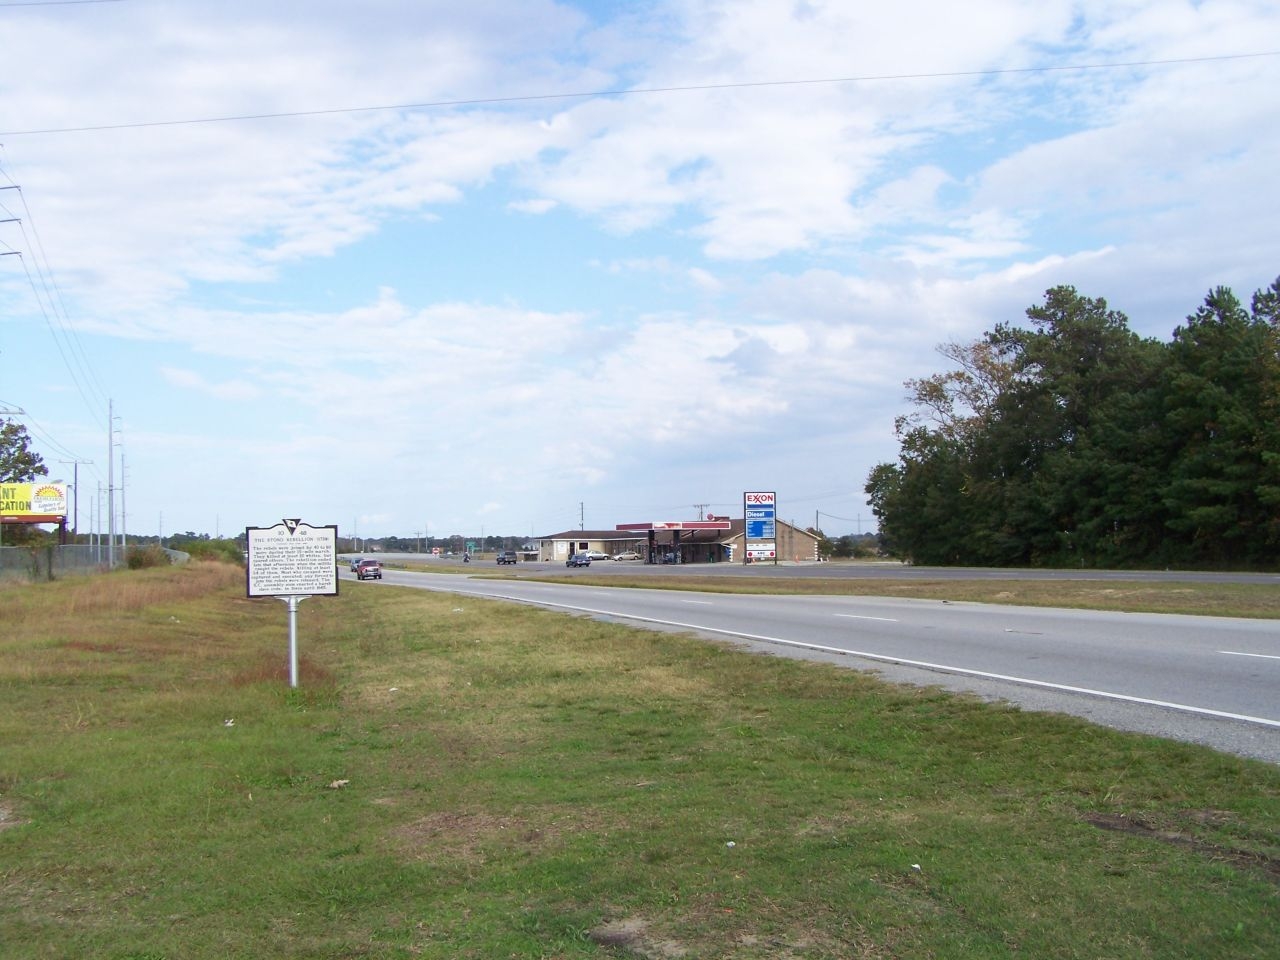 The Stono Rebellion Marker, looking north on US 17